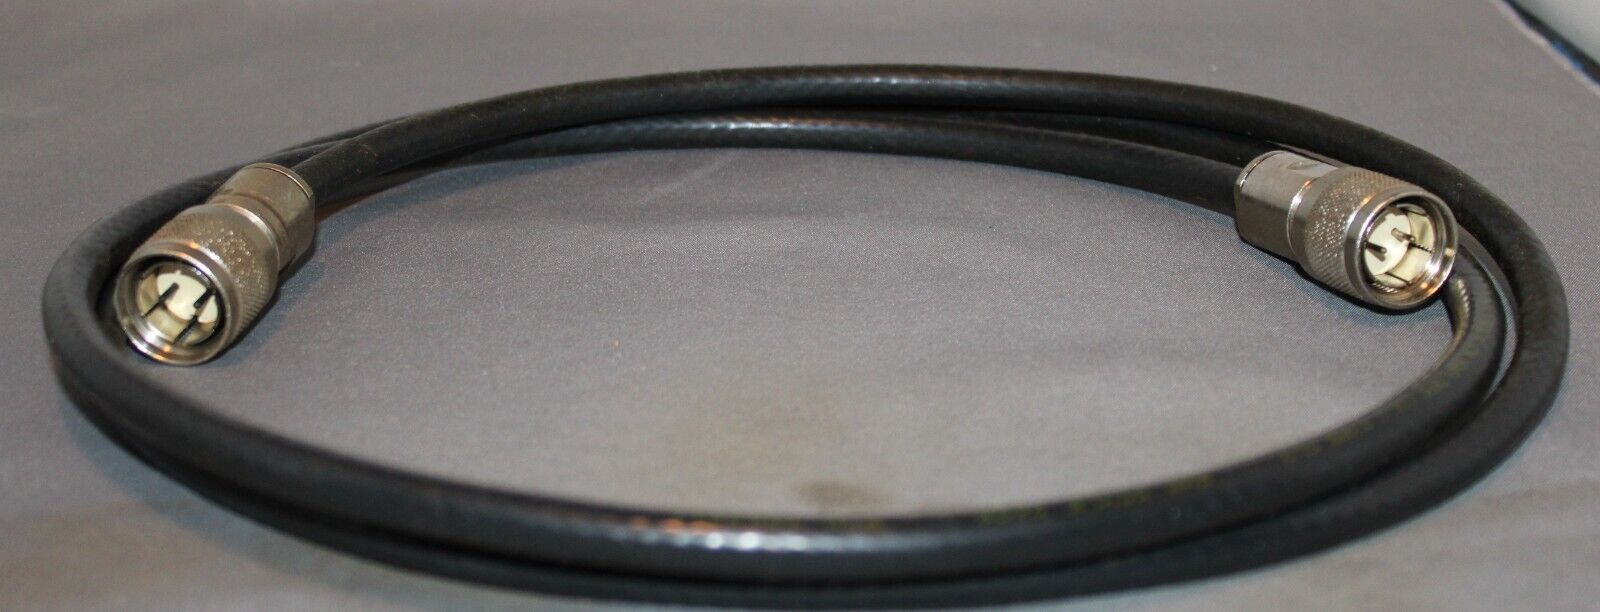 IBM AS/400 or System 36 Twinax Cable 6 FT